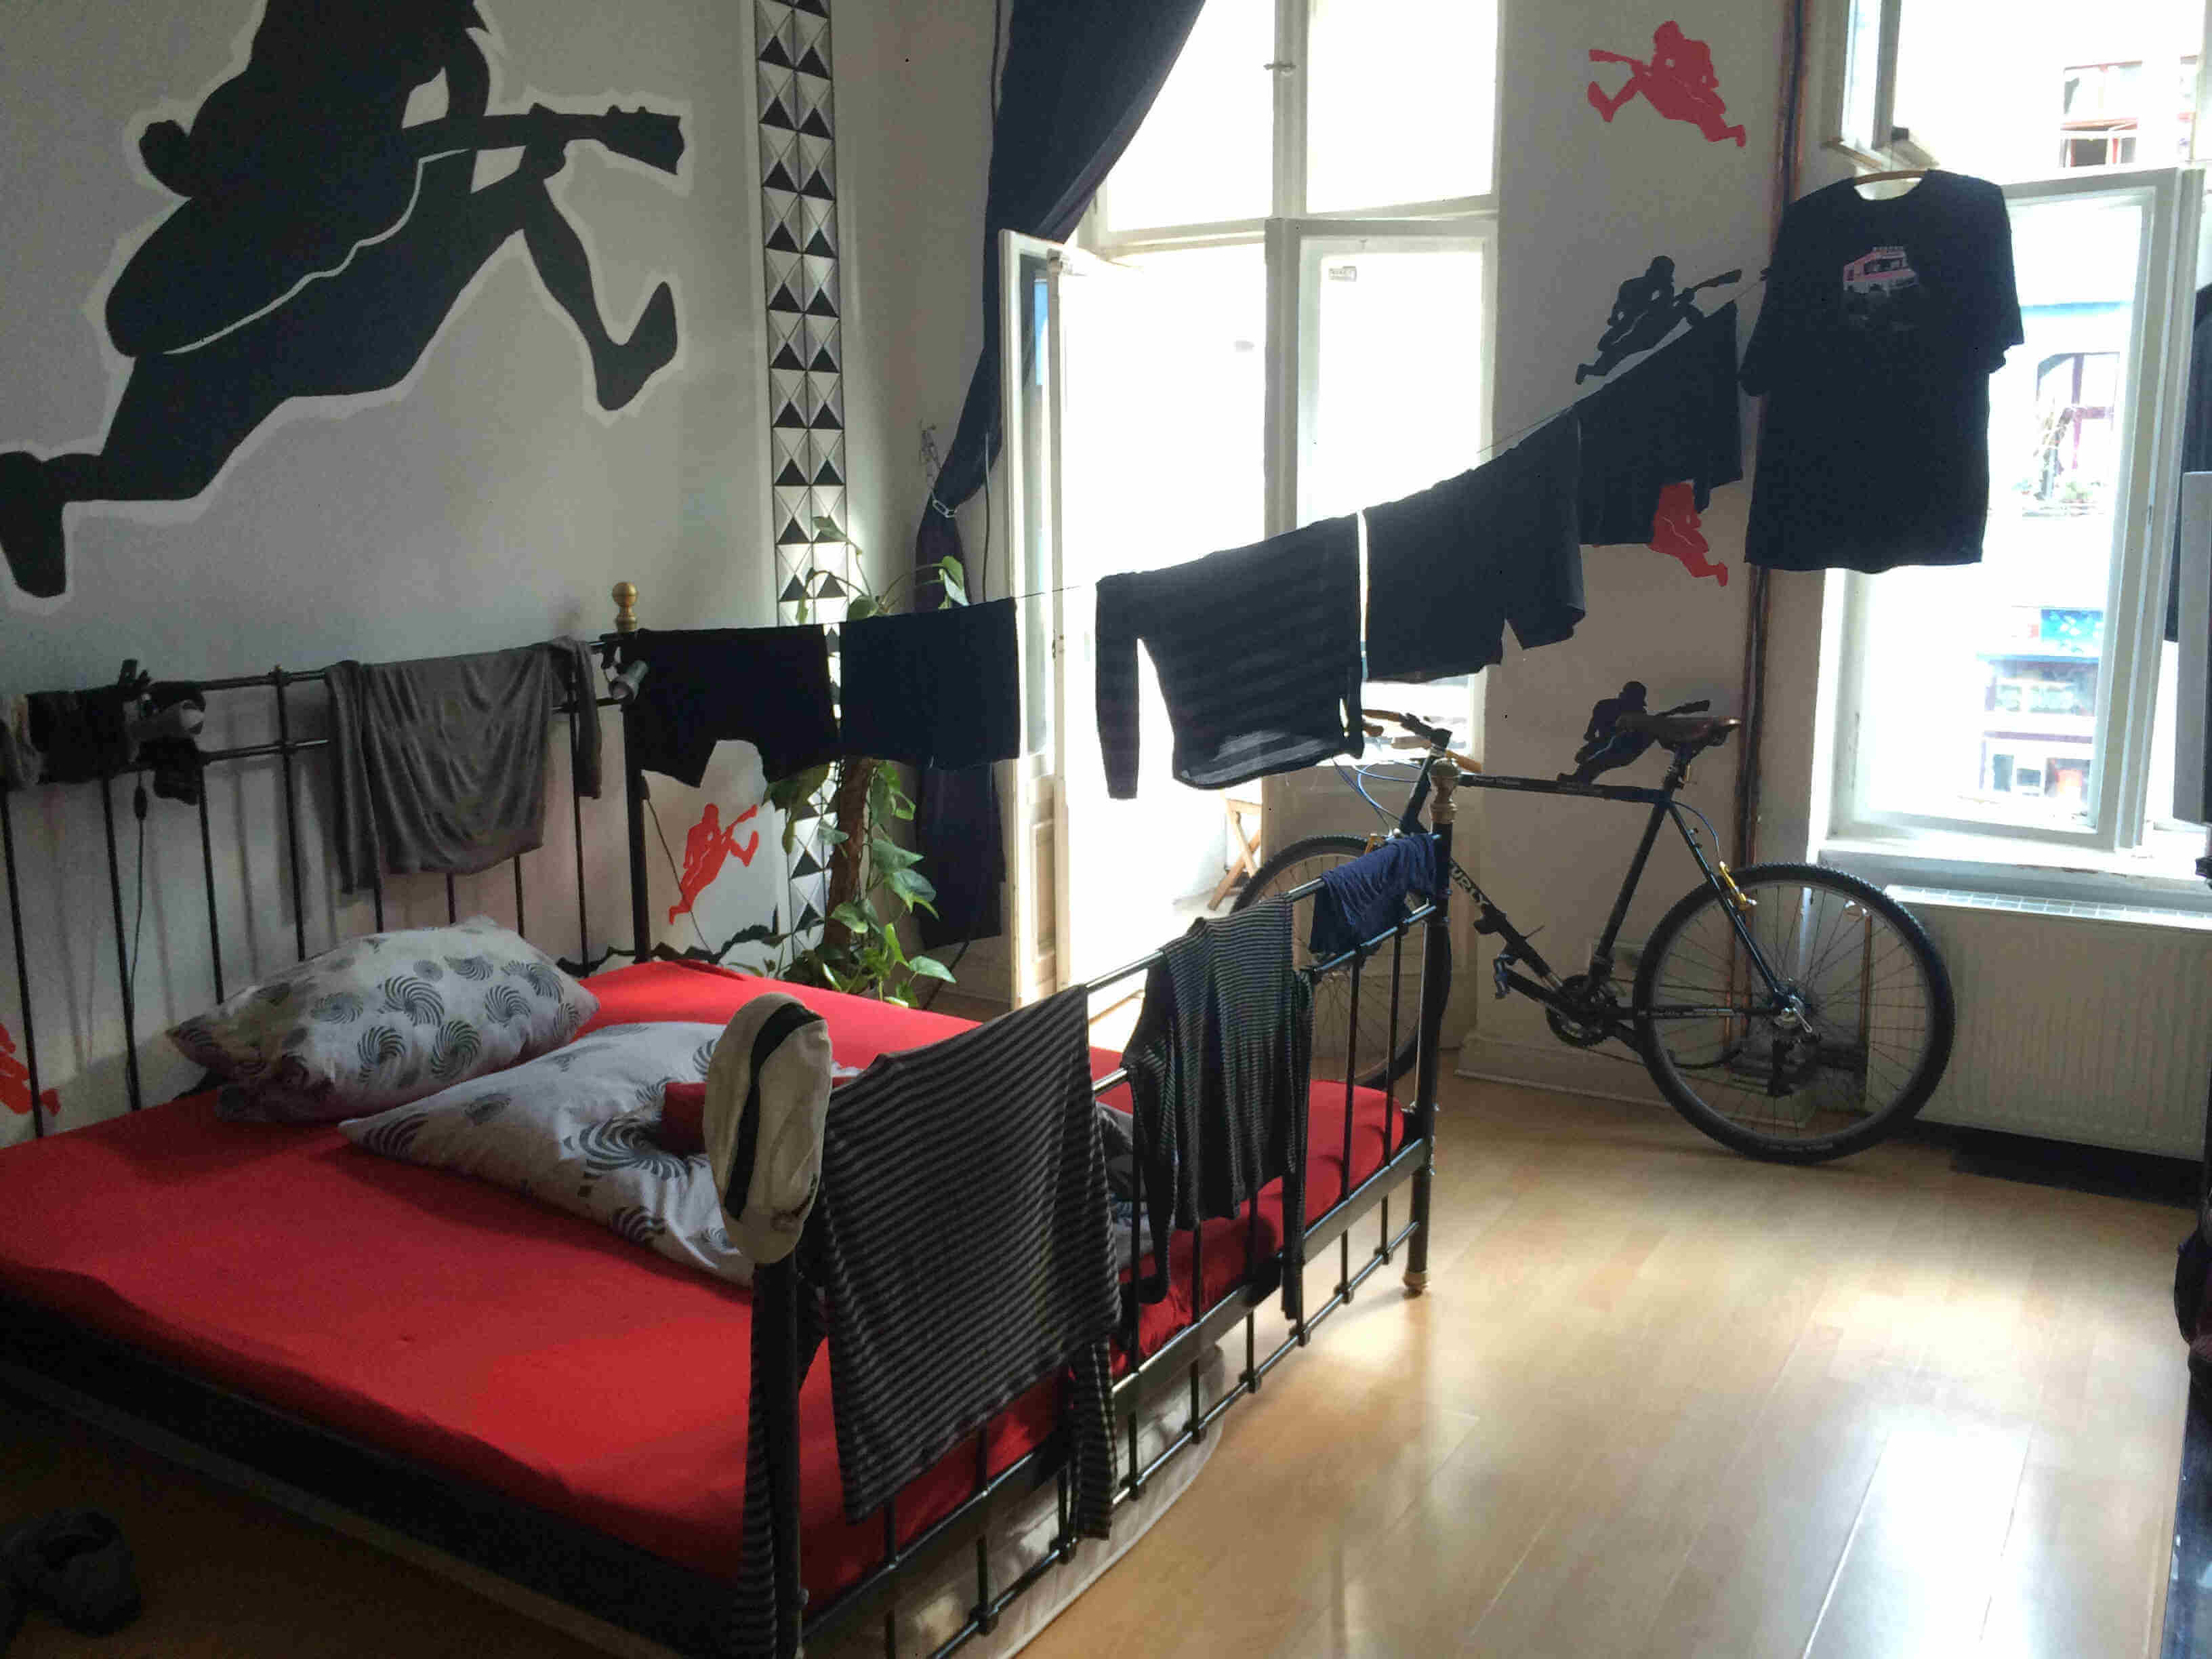 Angled view of a room, with a bed, clothes hanging on a cable, and a black Surly bike leaning next to a glass door